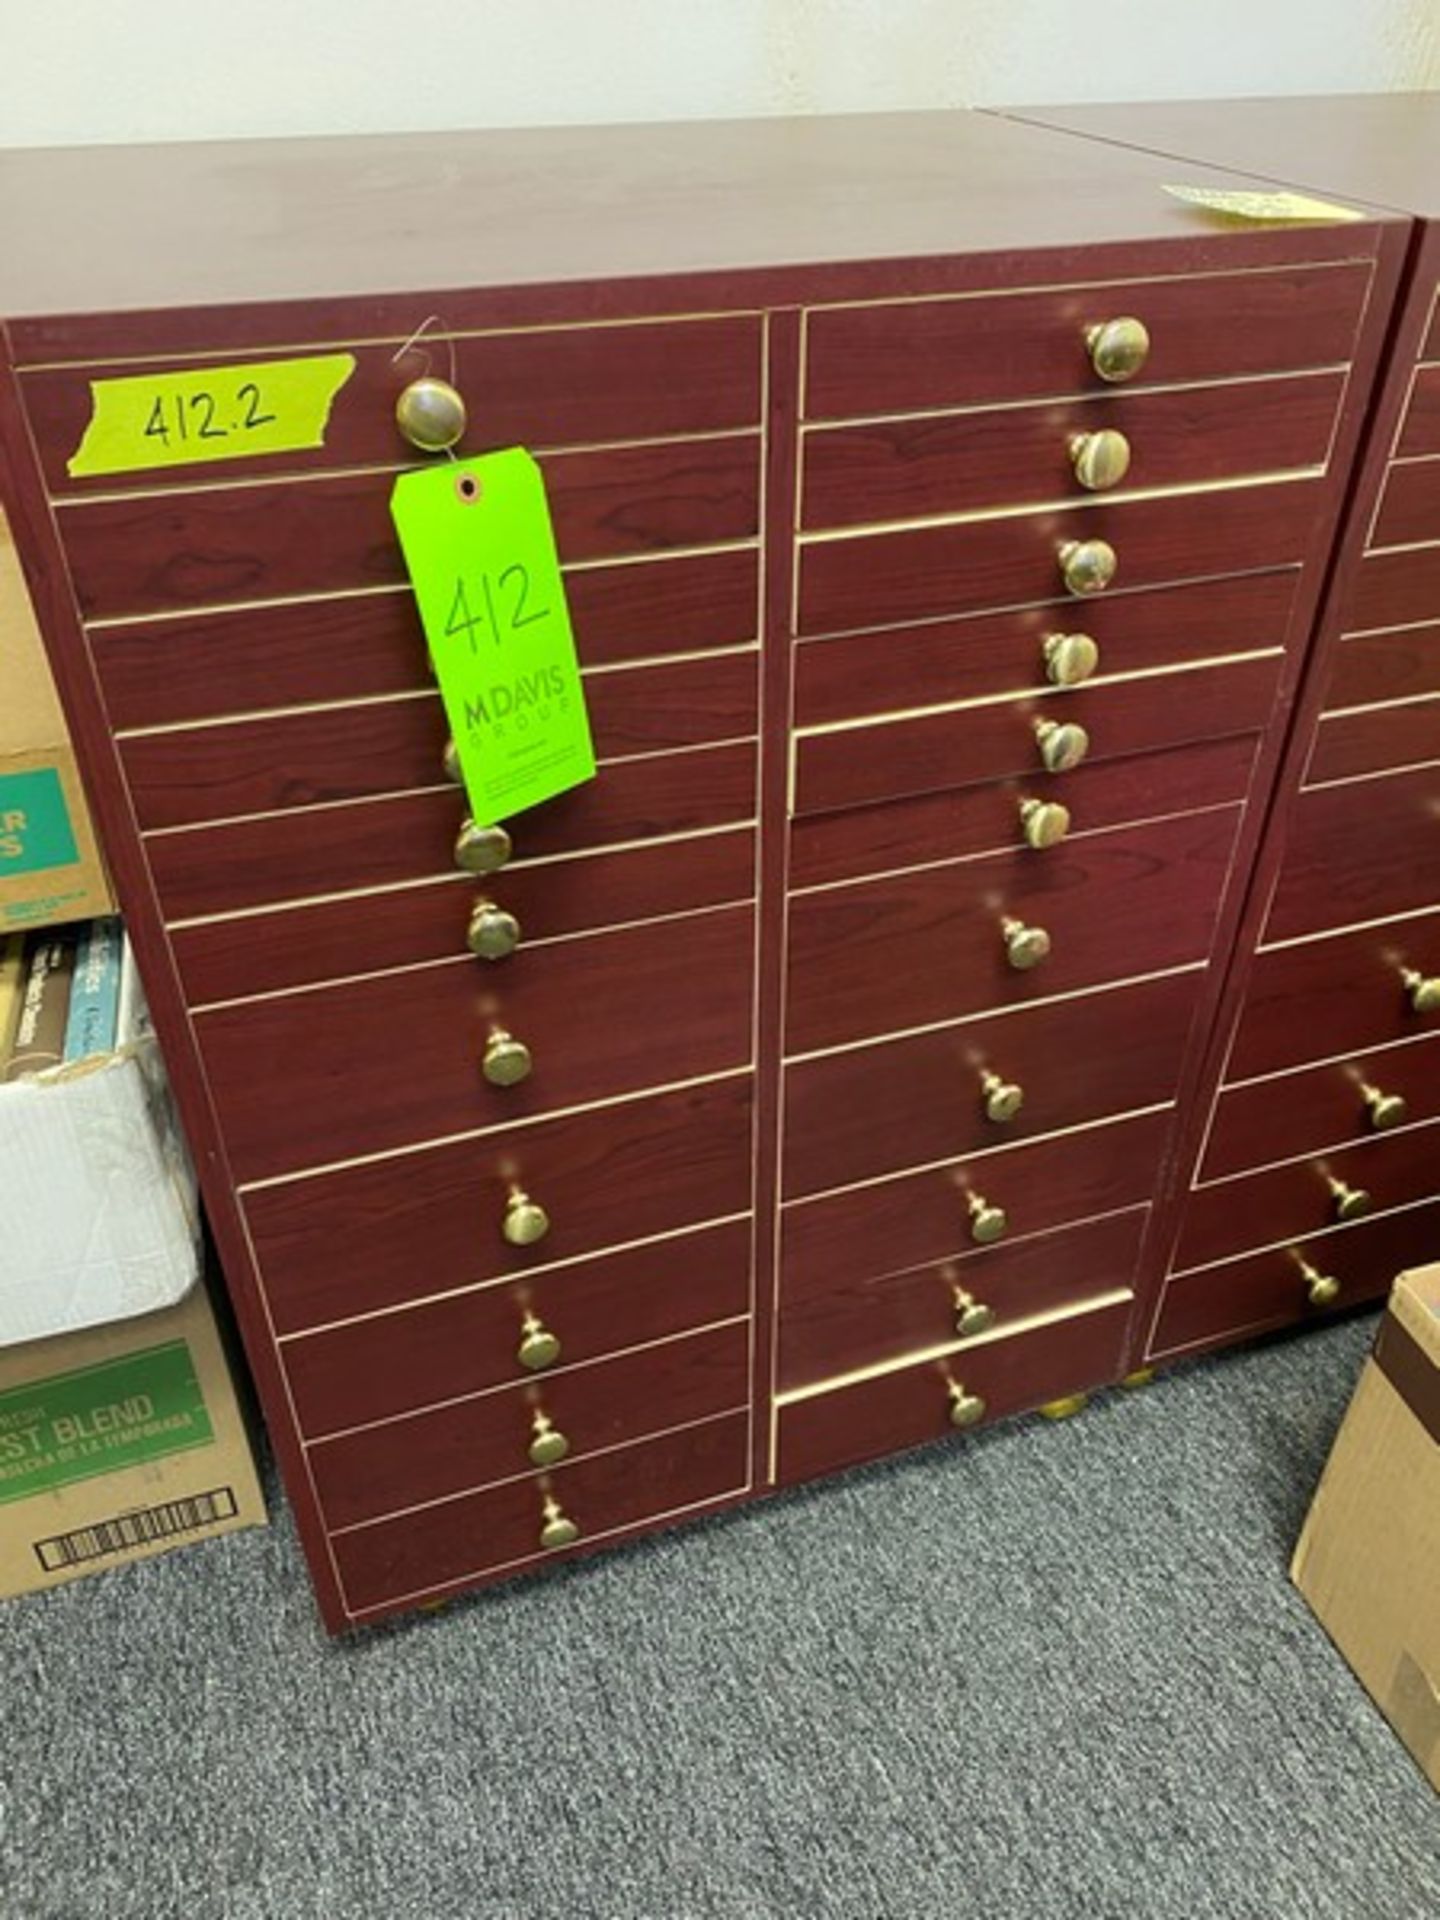 3 total office dark wood cabinets / Brochure Storage units: 2 with 22 drawers each 27.5"Wx20"Dx39. - Image 10 of 12